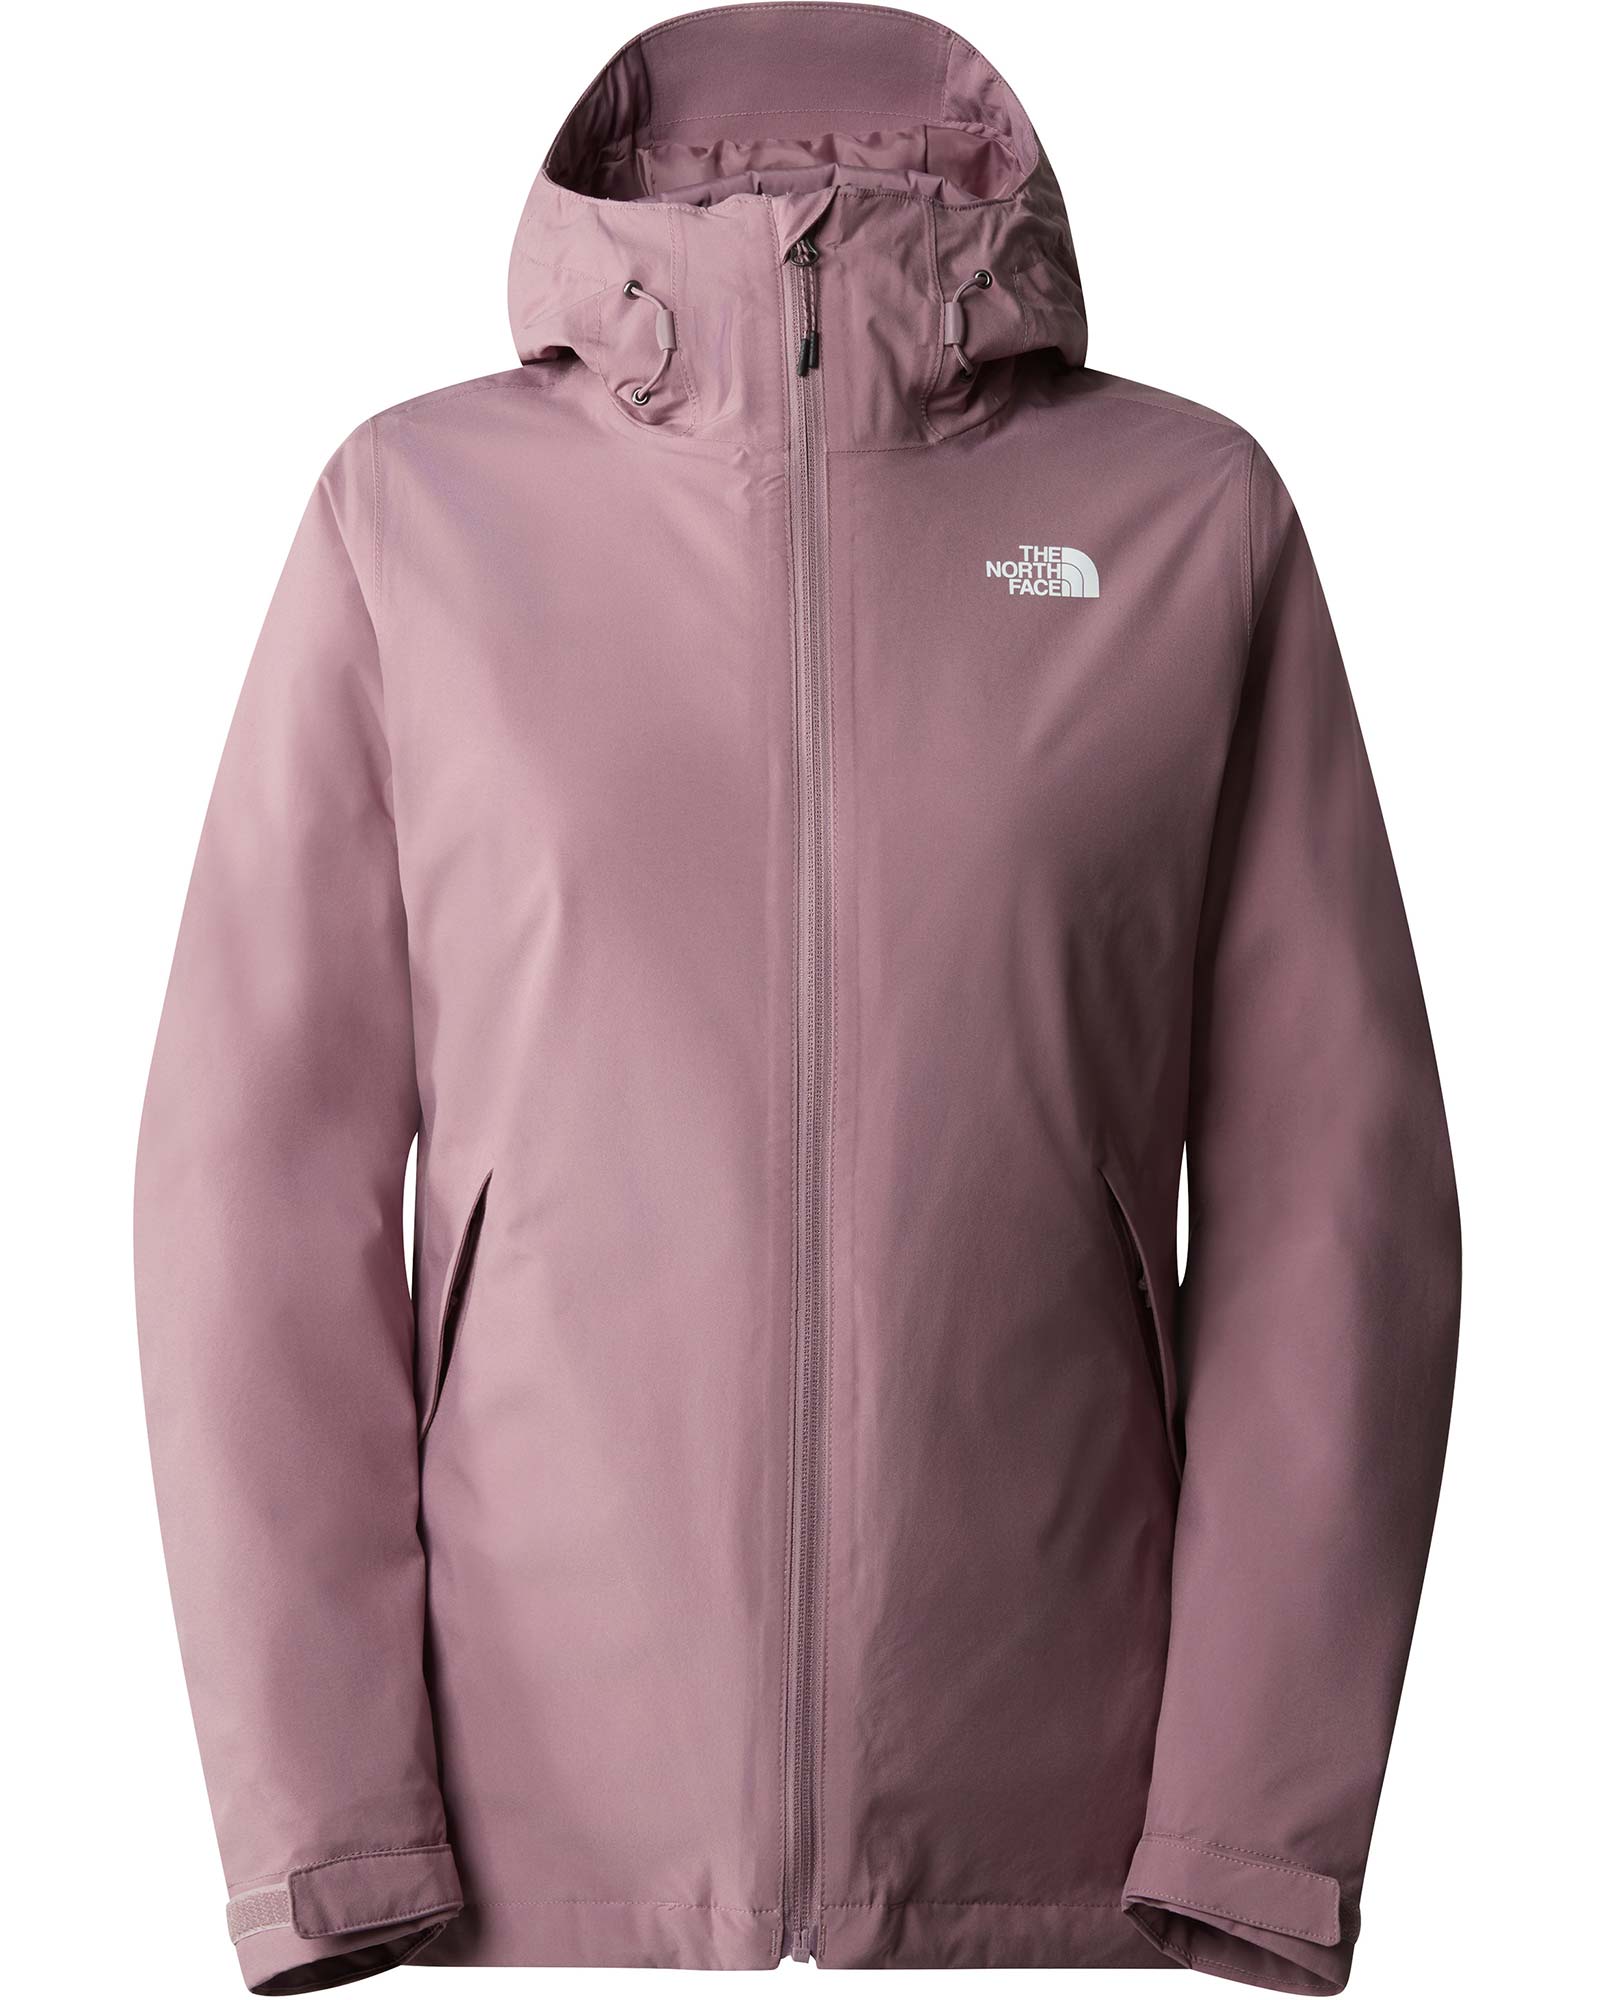 The North Face Carto Women’s Triclimate Jacket - Fawn Grey XS